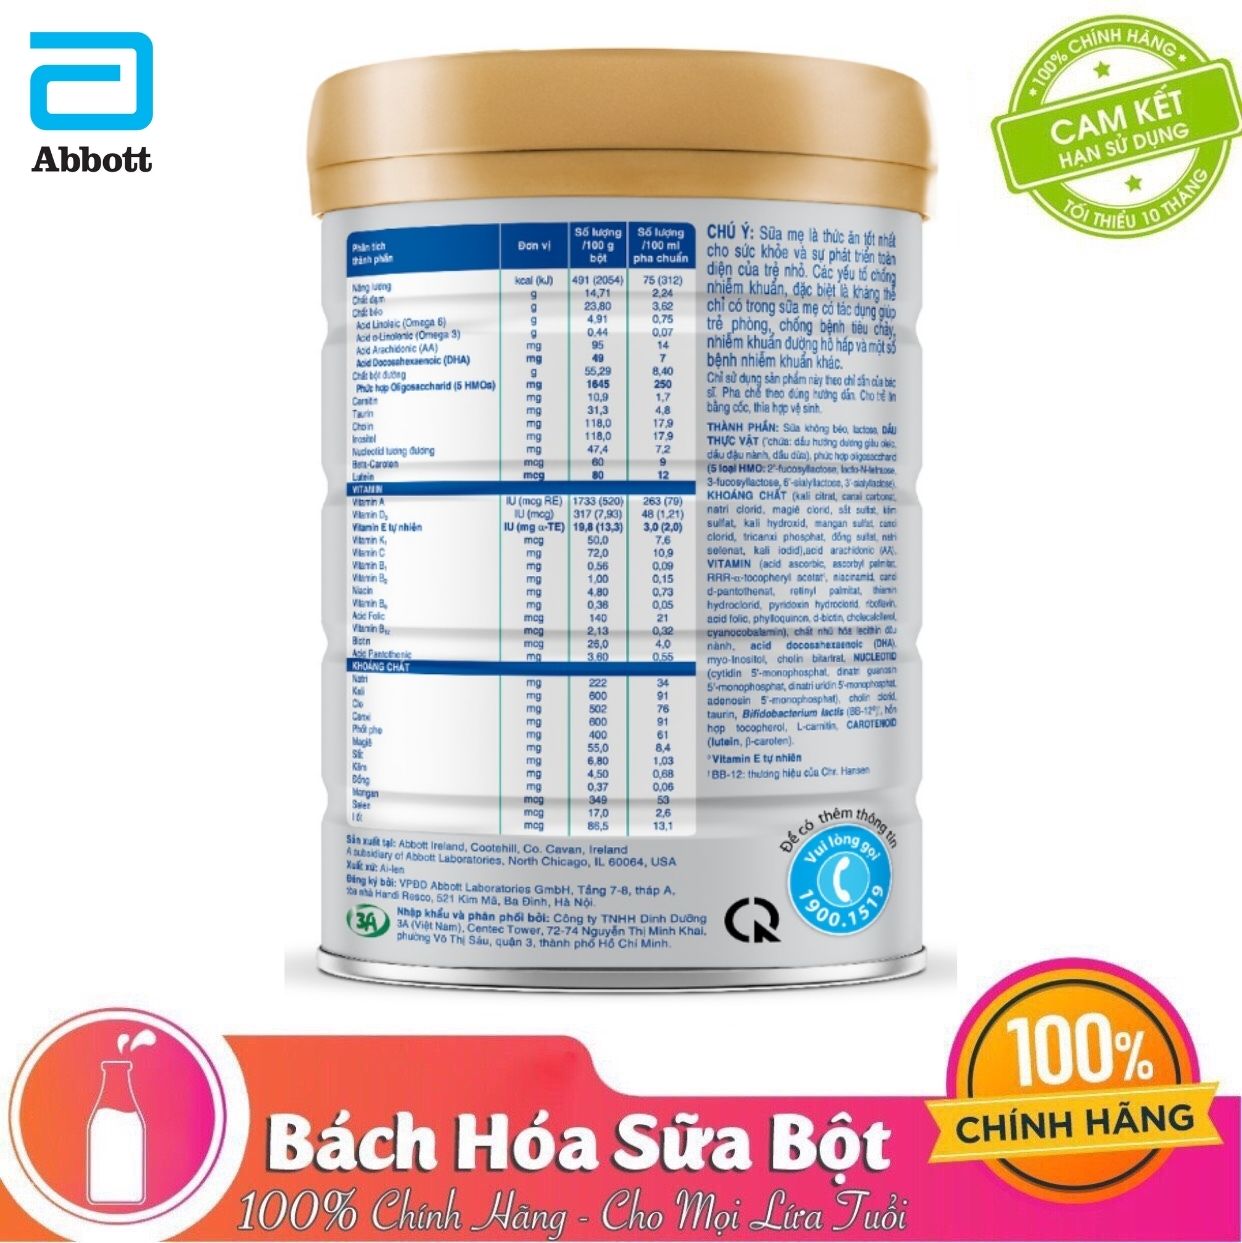 Sữa bột Abbott Similac Total Protection 1 (400g)